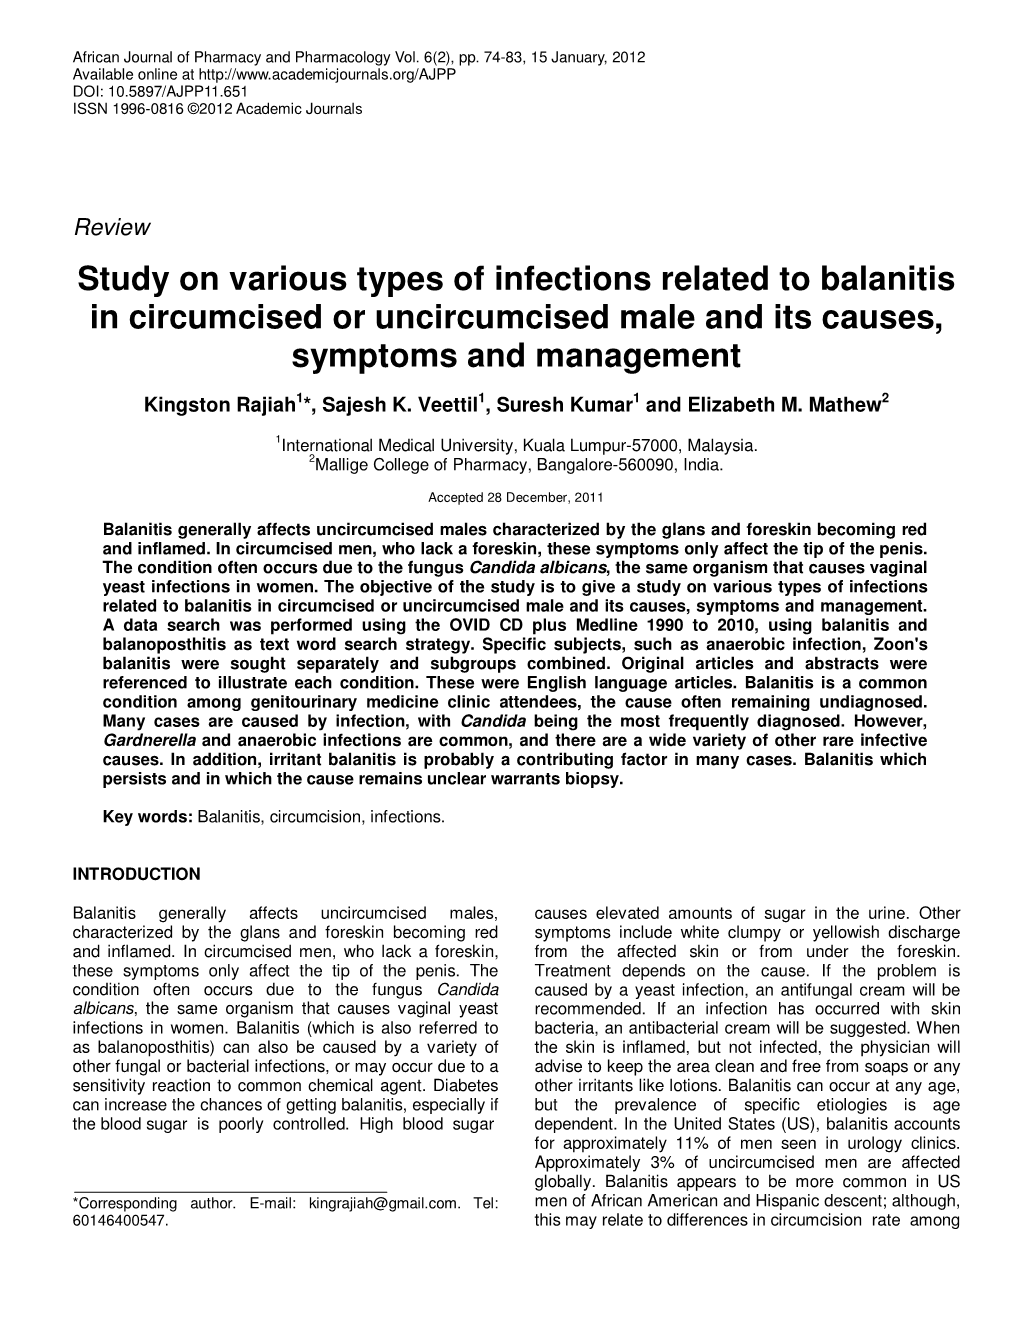 Study on Various Types of Infections Related to Balanitis in Circumcised Or Uncircumcised Male and Its Causes, Symptoms and Management